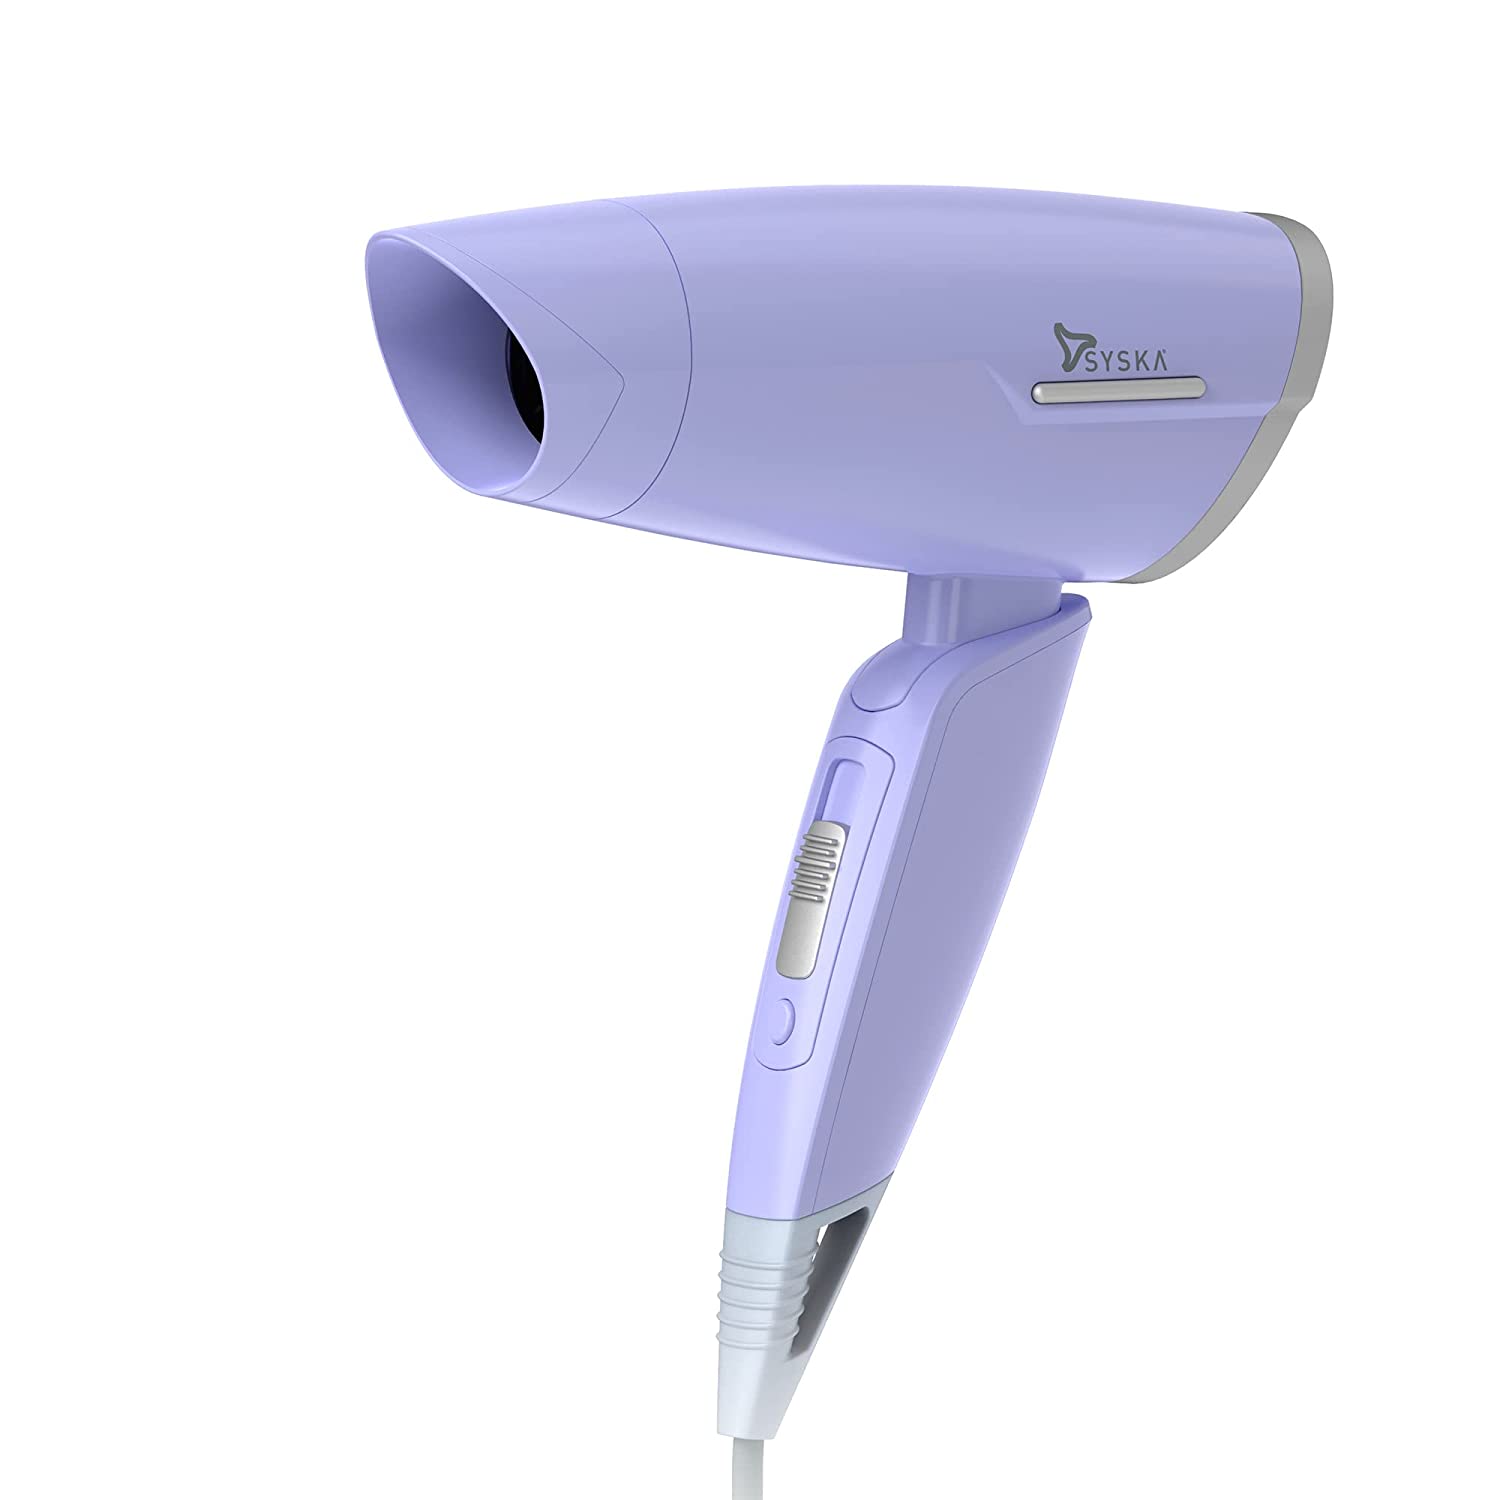 Kemei KM5805 Hair Dryer Price in India Full Specifications  Offers   DTashioncom